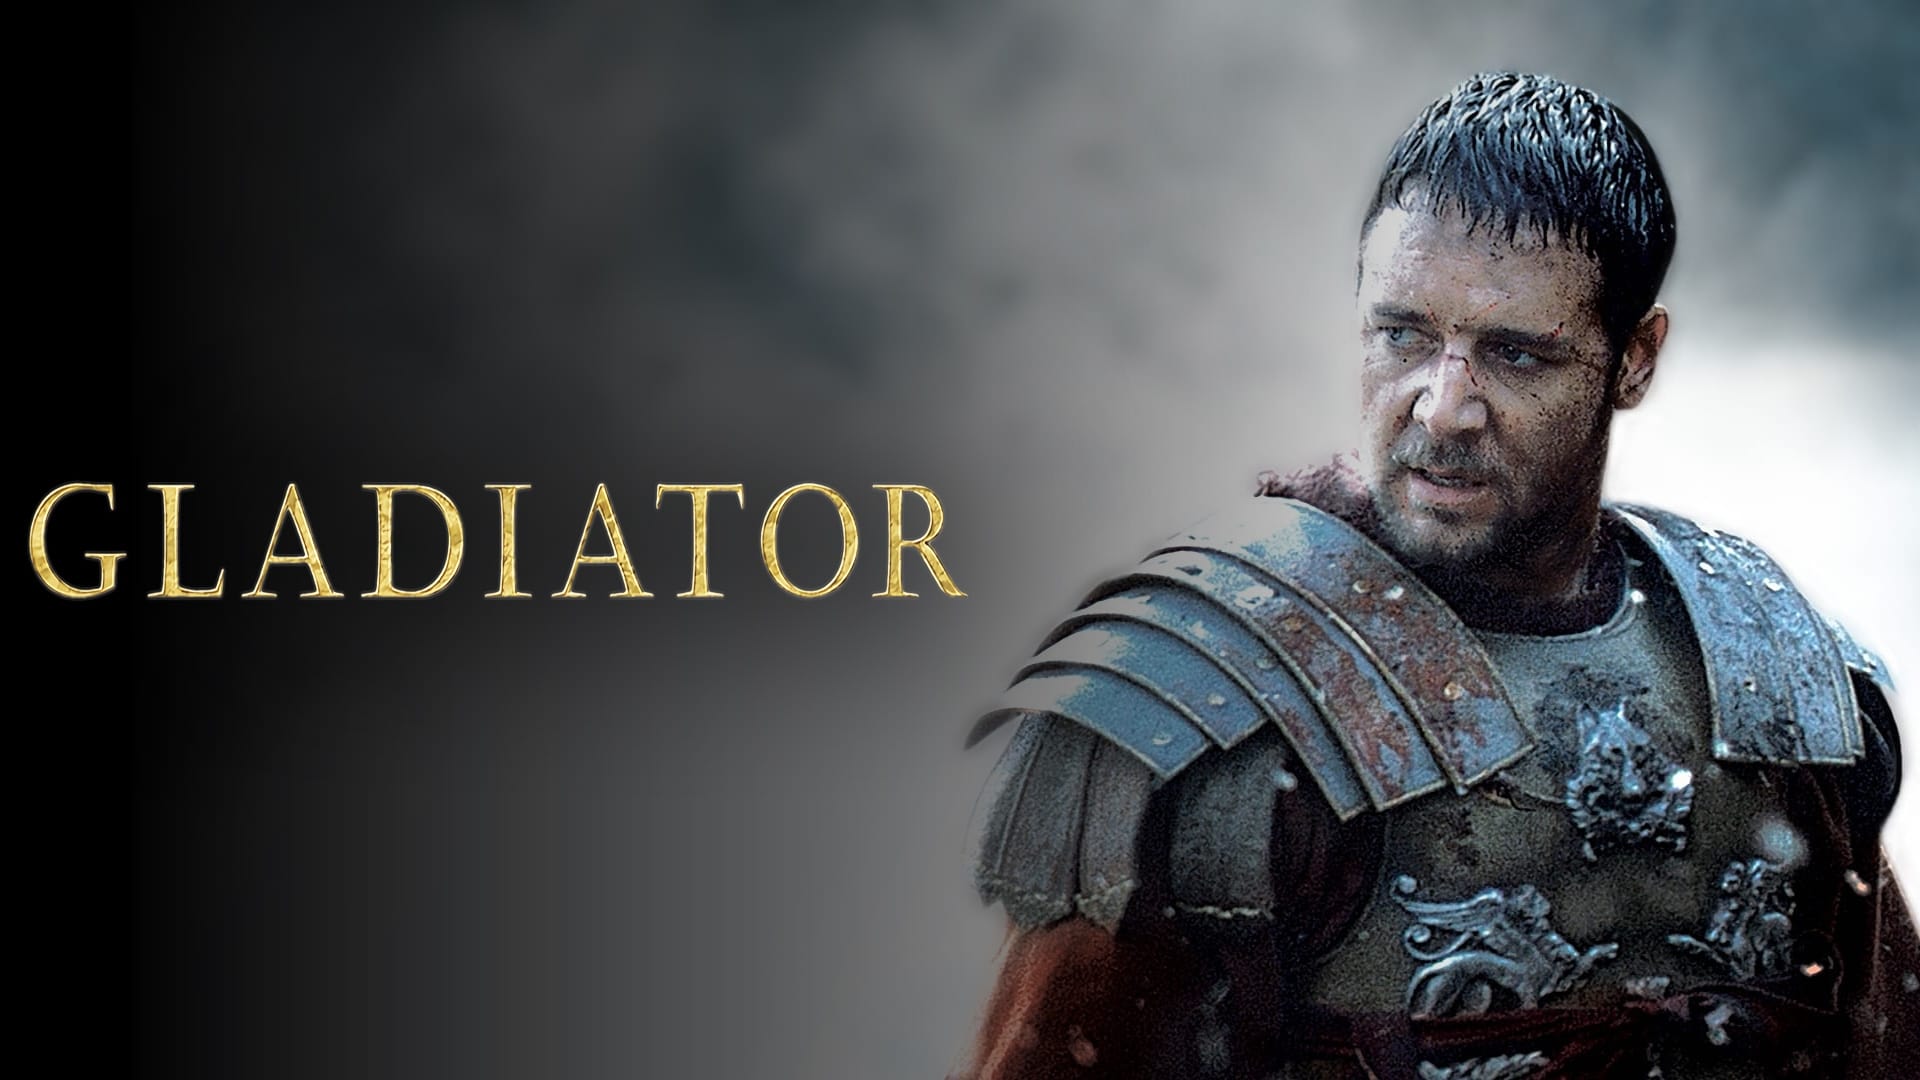 How To Watch Gladiator